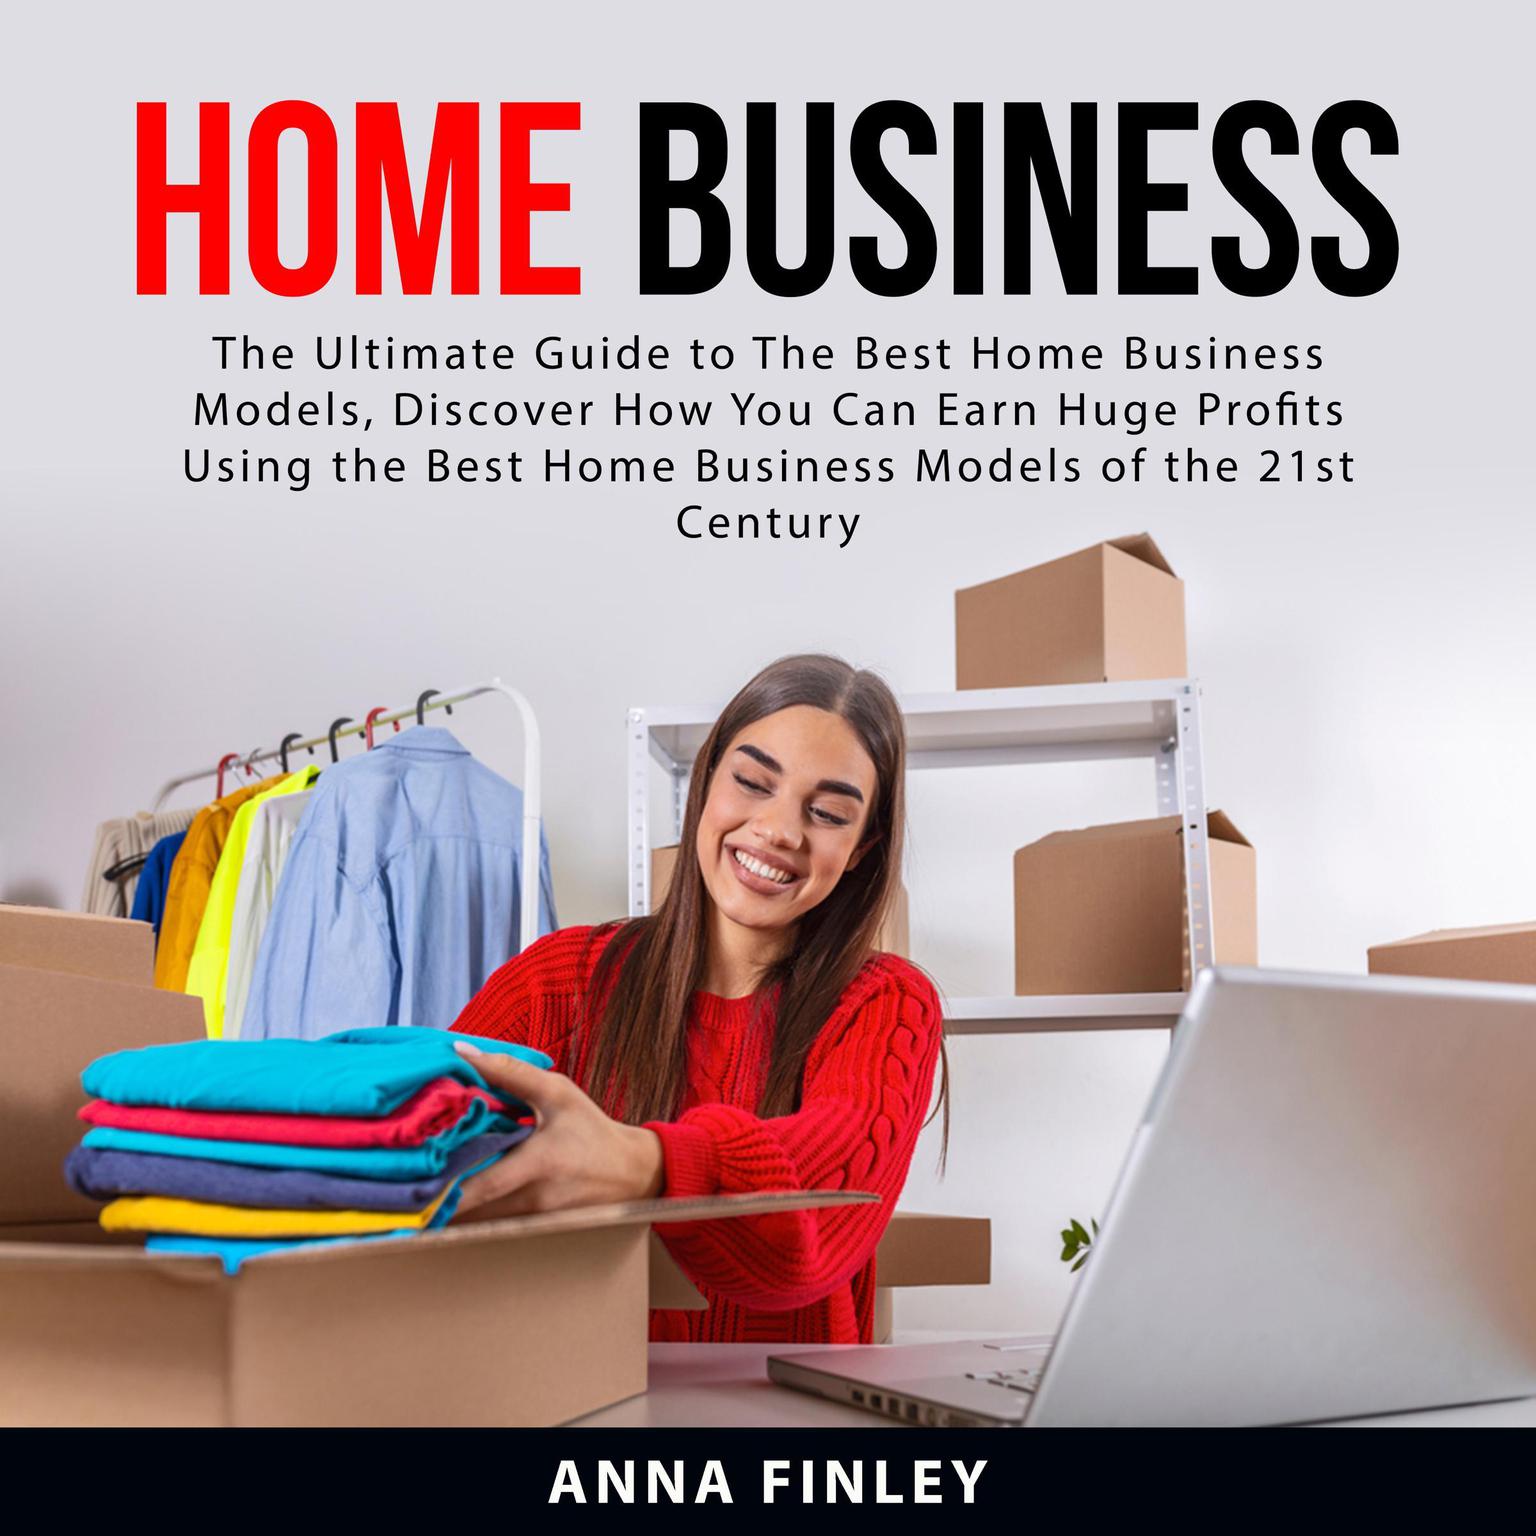 Home Business: The Ultimate Guide to The Best Home Business Models, Discover How You Can Earn Huge Profits Using the Best Home Business Models of the 21st Century Audiobook, by Anna Finley